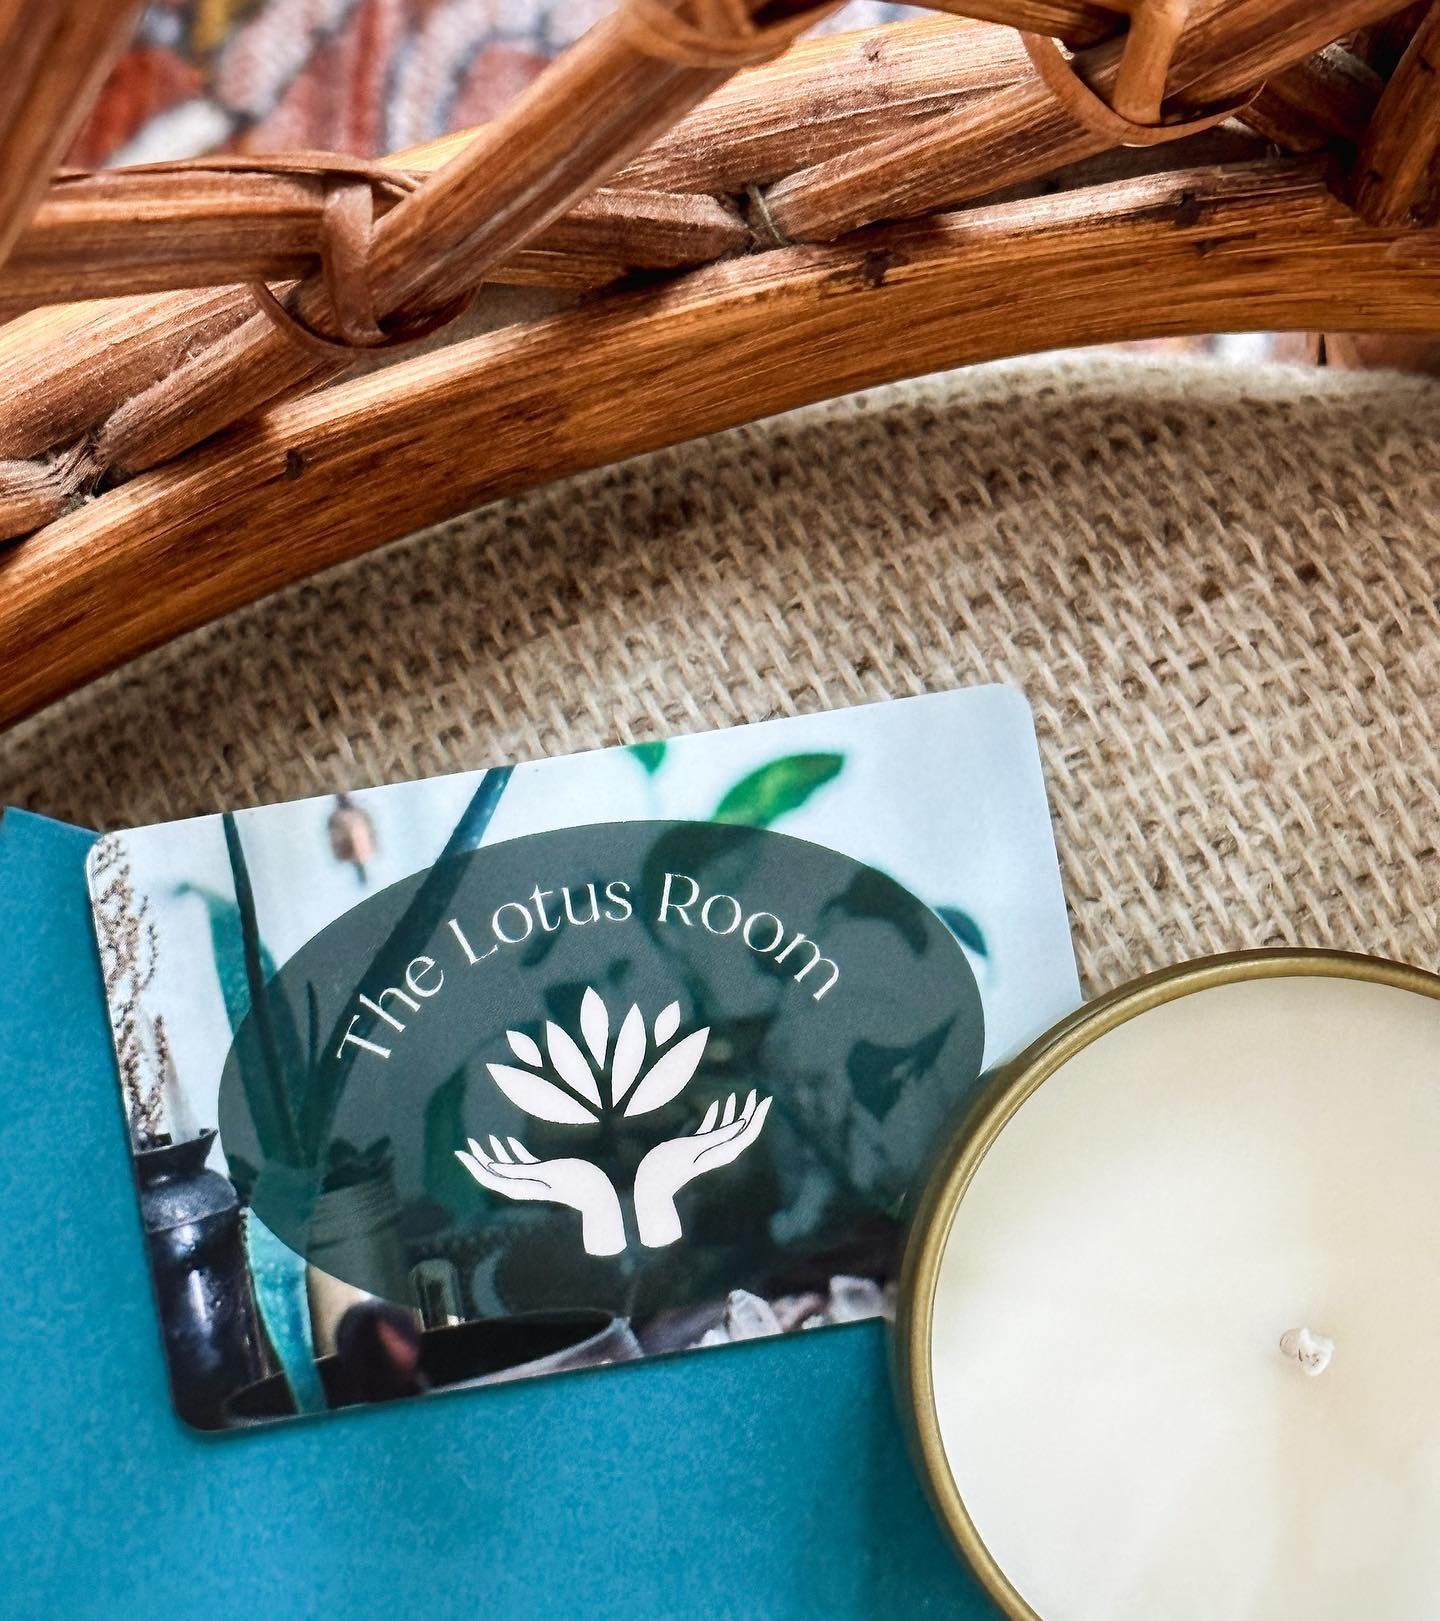 To celebrate Mother&rsquo;s Day, we are offering a limited time special on gift cards purchased in-store!! 🥰

💕Buy a $50 gift card and receive one Lotus Room candle in our signature scent! 
💕Buy a $100 gift card and receive one Lotus Room candle, 